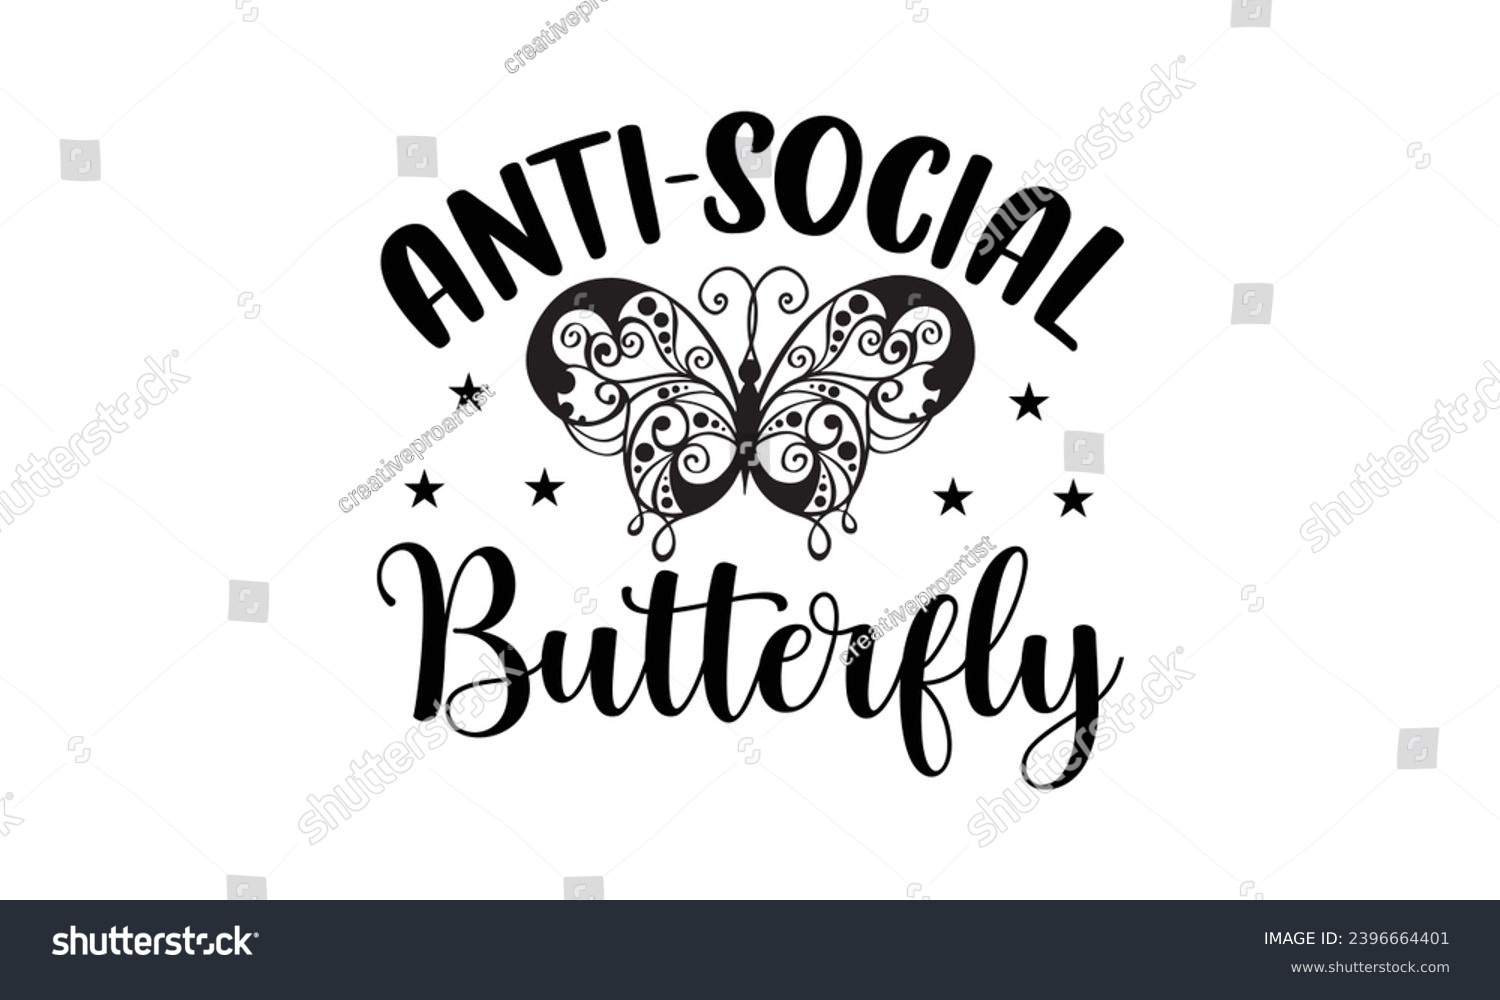 SVG of Anti-social butterfly- Butterfly t- shirt design, Handmade calligraphy vector illustration for Cutting Machine, Silhouette Cameo, Cricut, Vector illustration Template eps svg